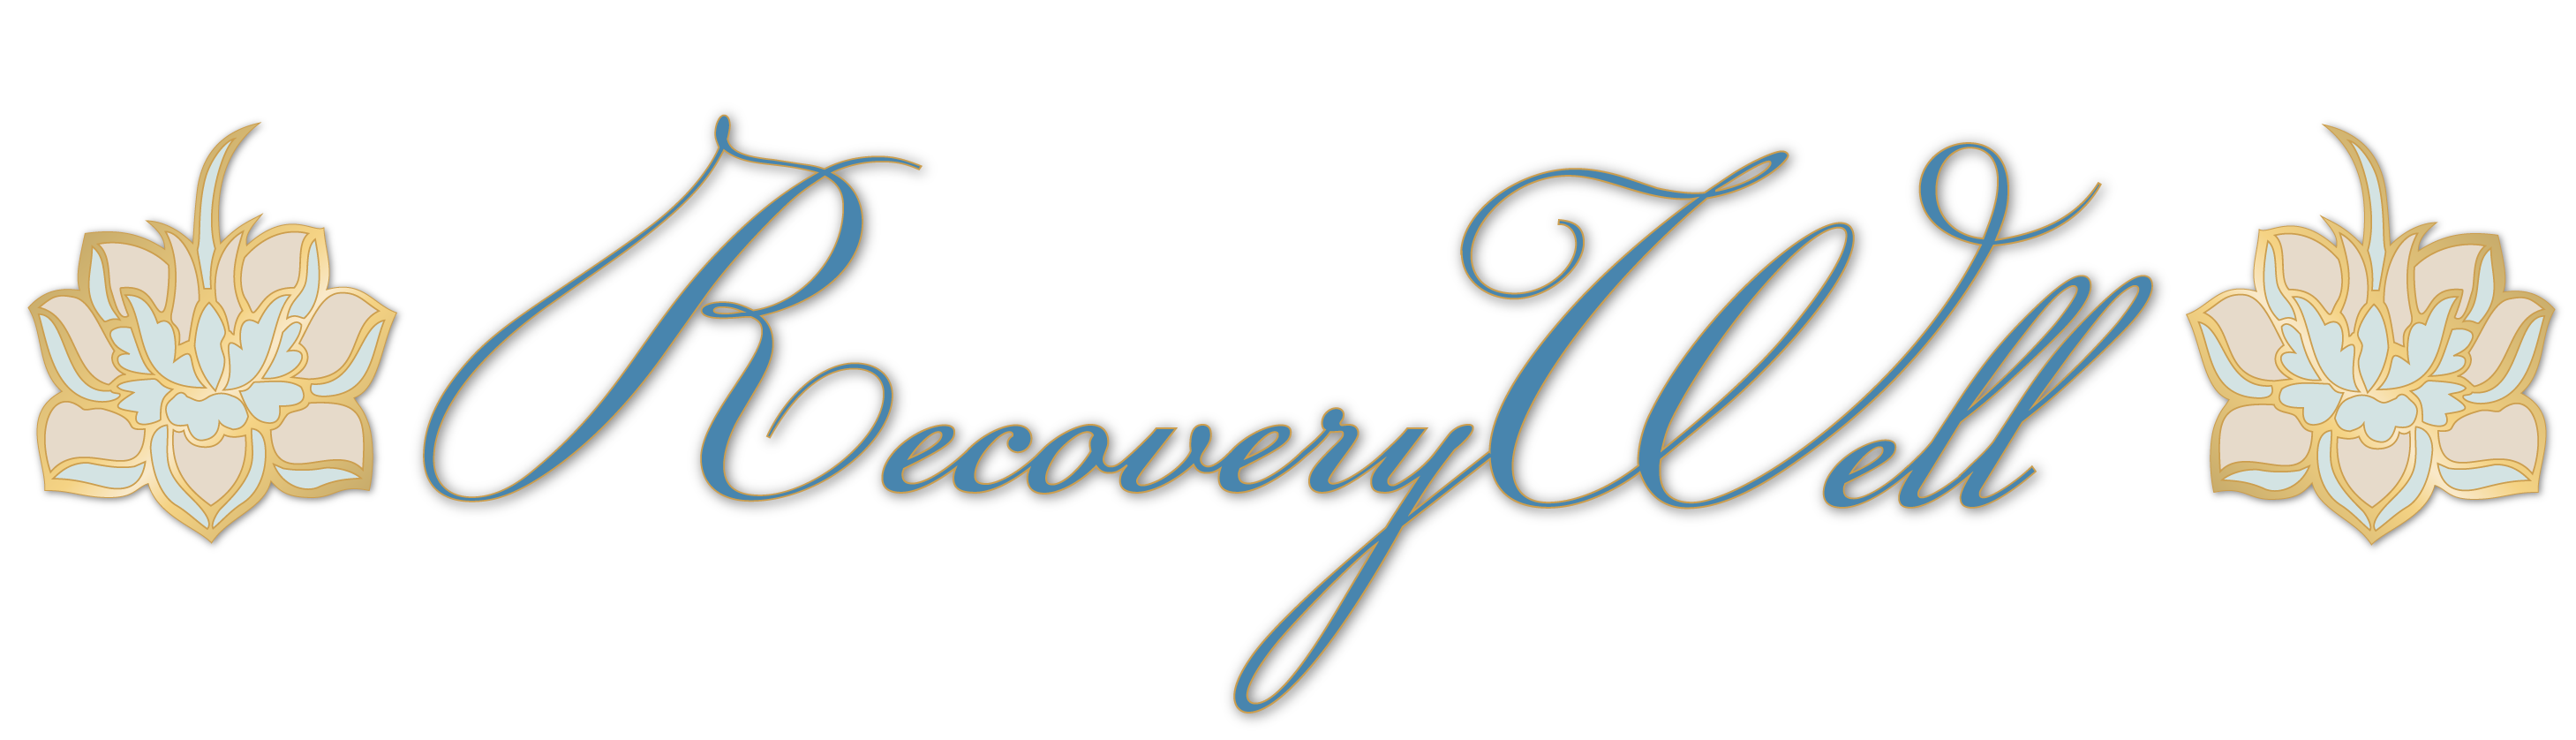 Recovery Well